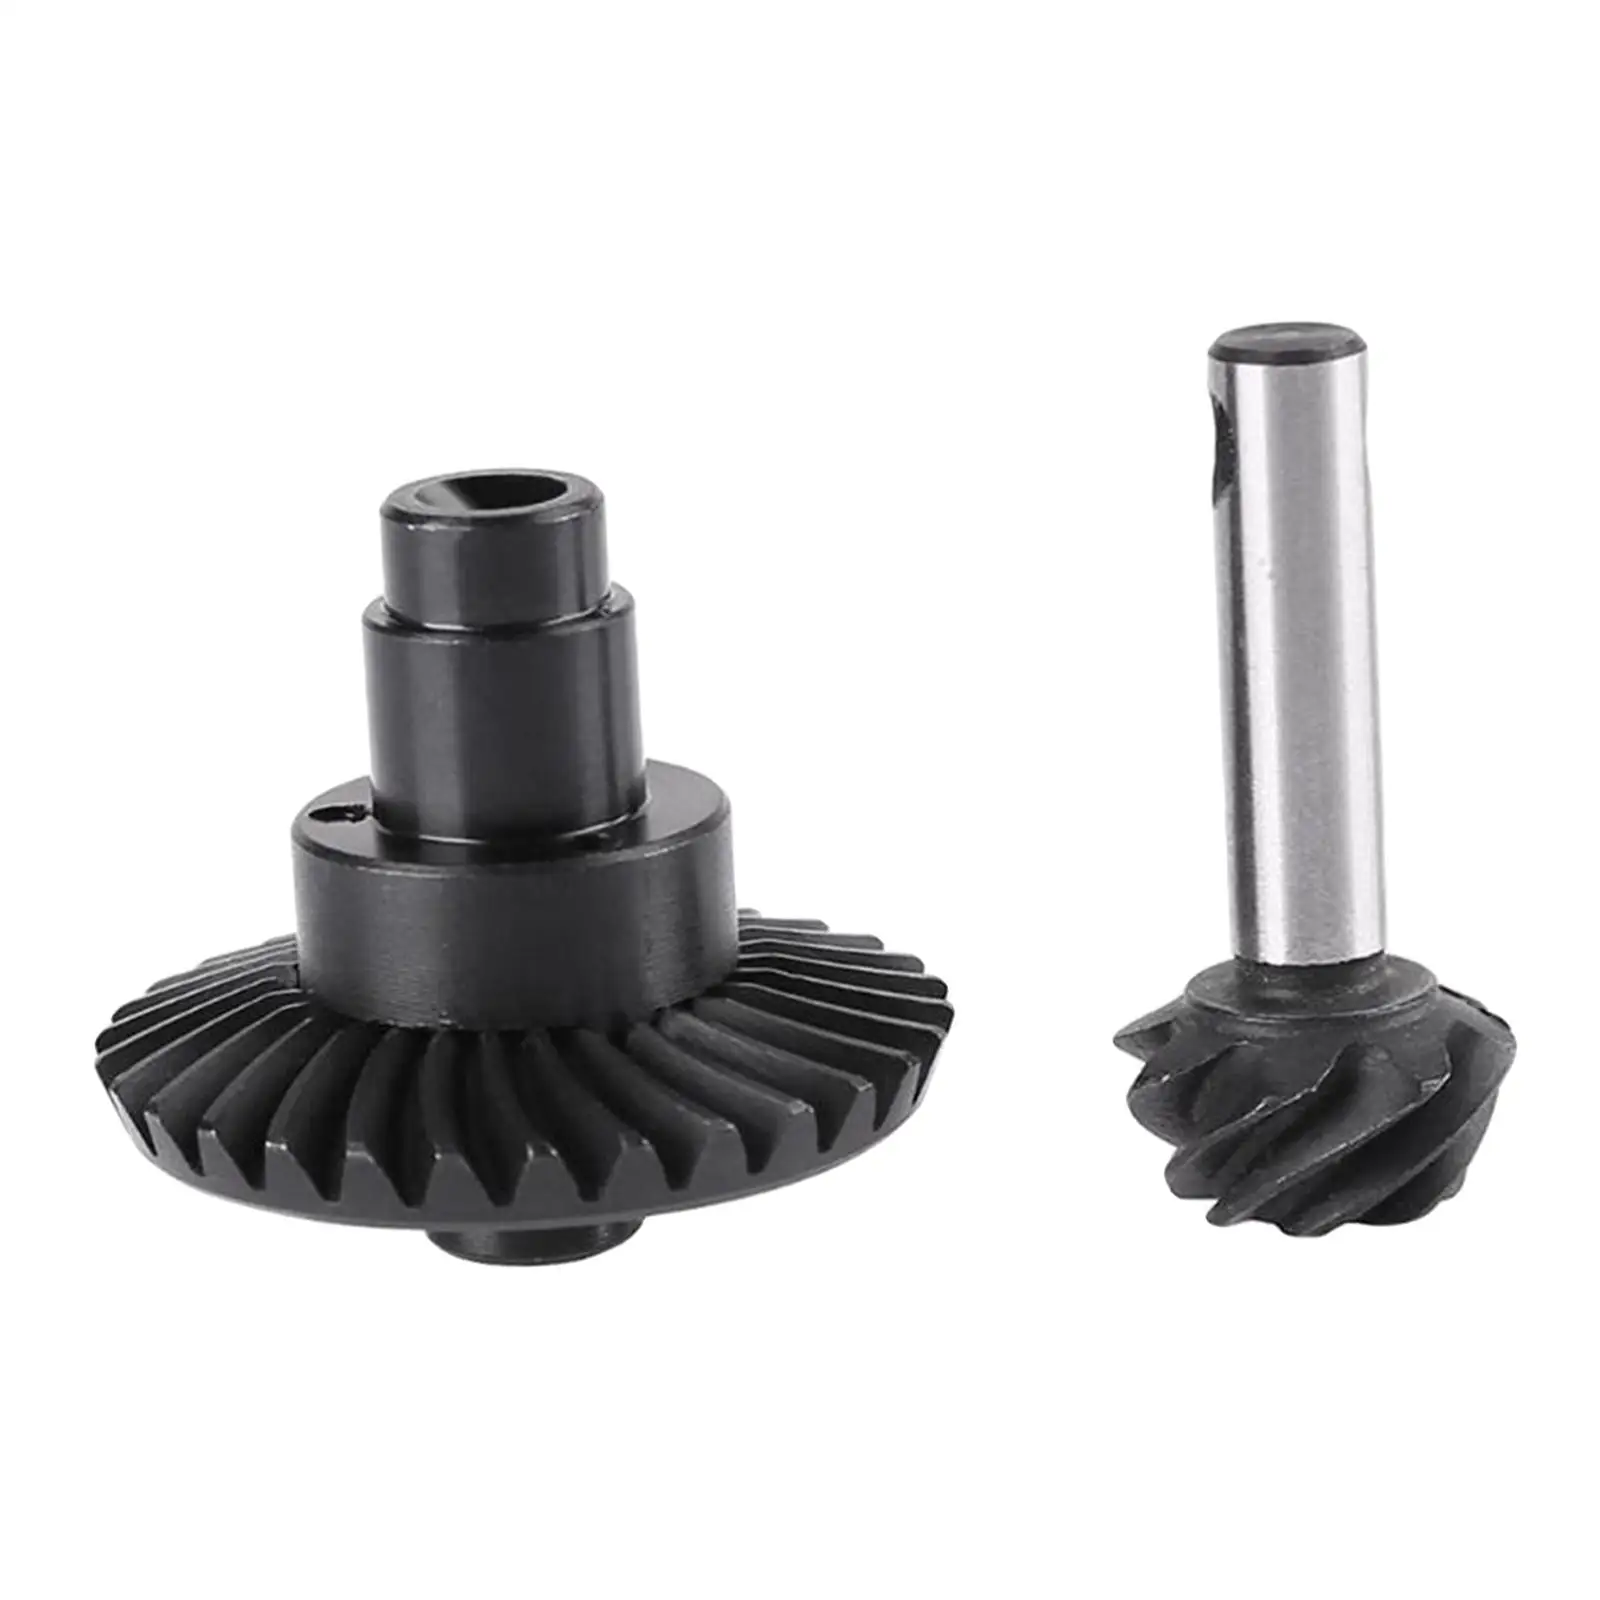 8T 30T Steel Helical Bevel Axle Gear for 1/10 RC Crawler Axial SCX10 II 90046 90047 90059 90060